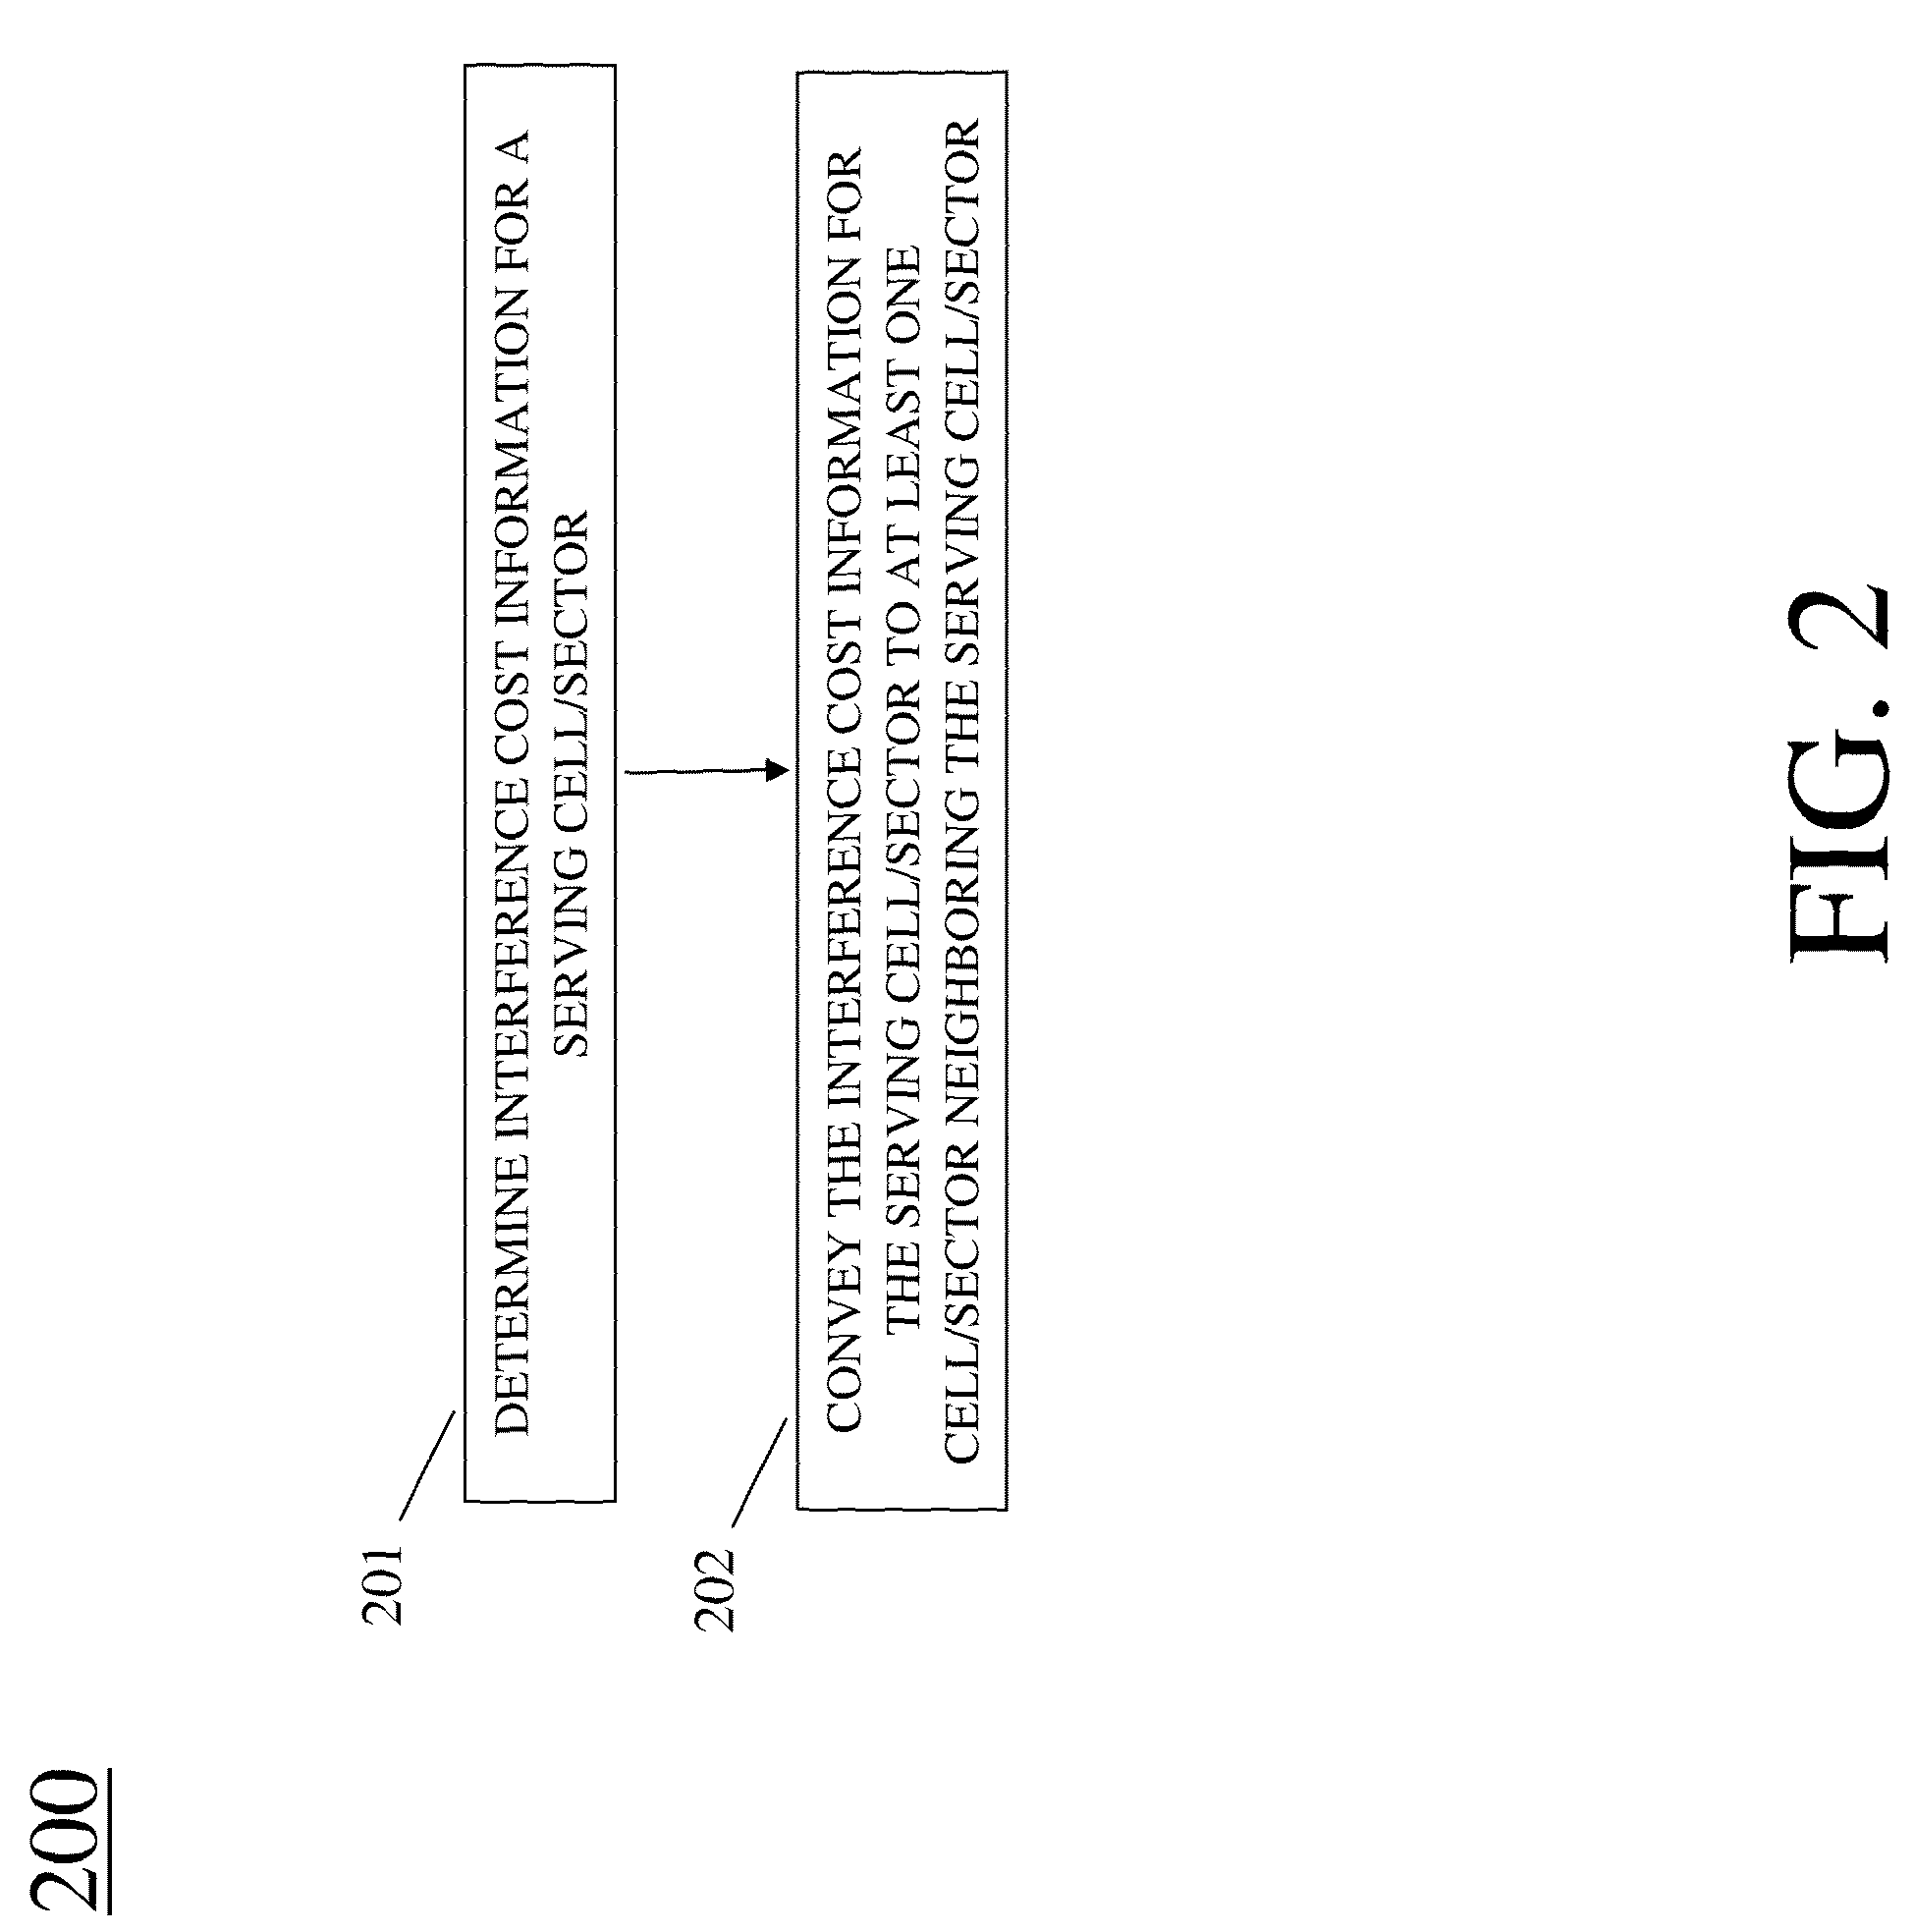 Apparatus And Method To Facilitate Wireless Uplink Resource Allocation